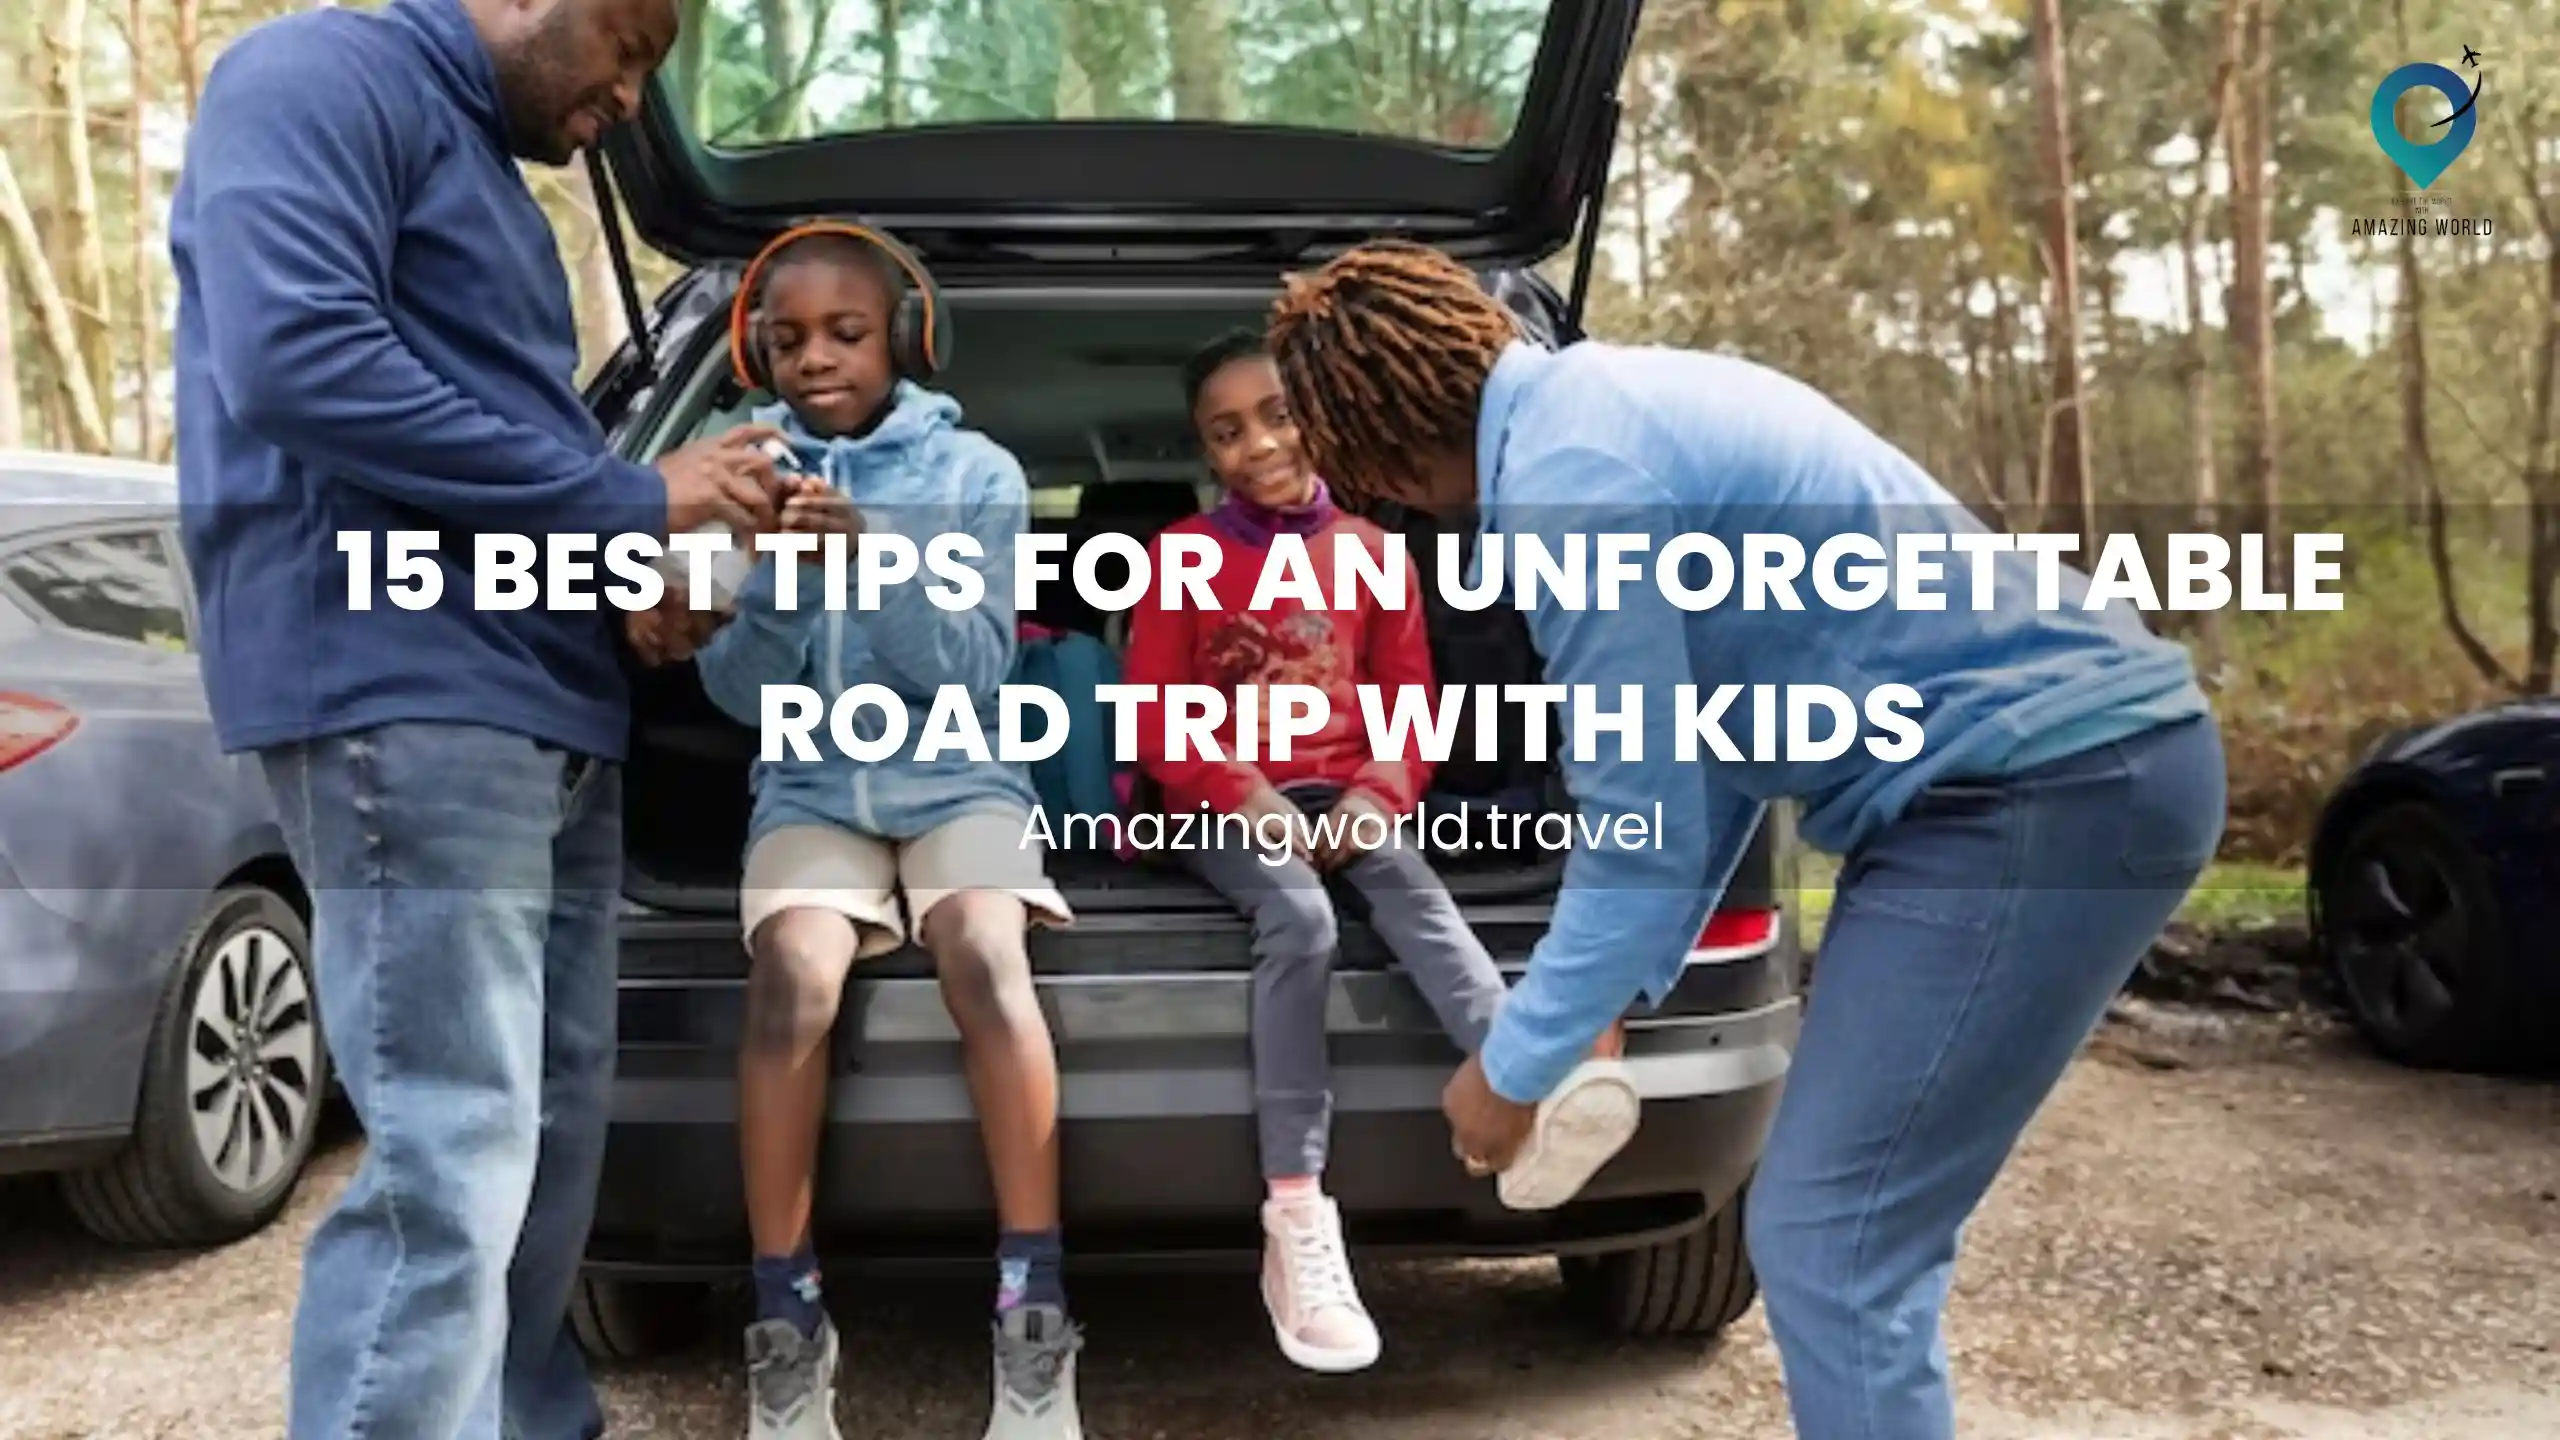 Best-Tips-for-an-Unforgettable-Road-Trip-with-Kids